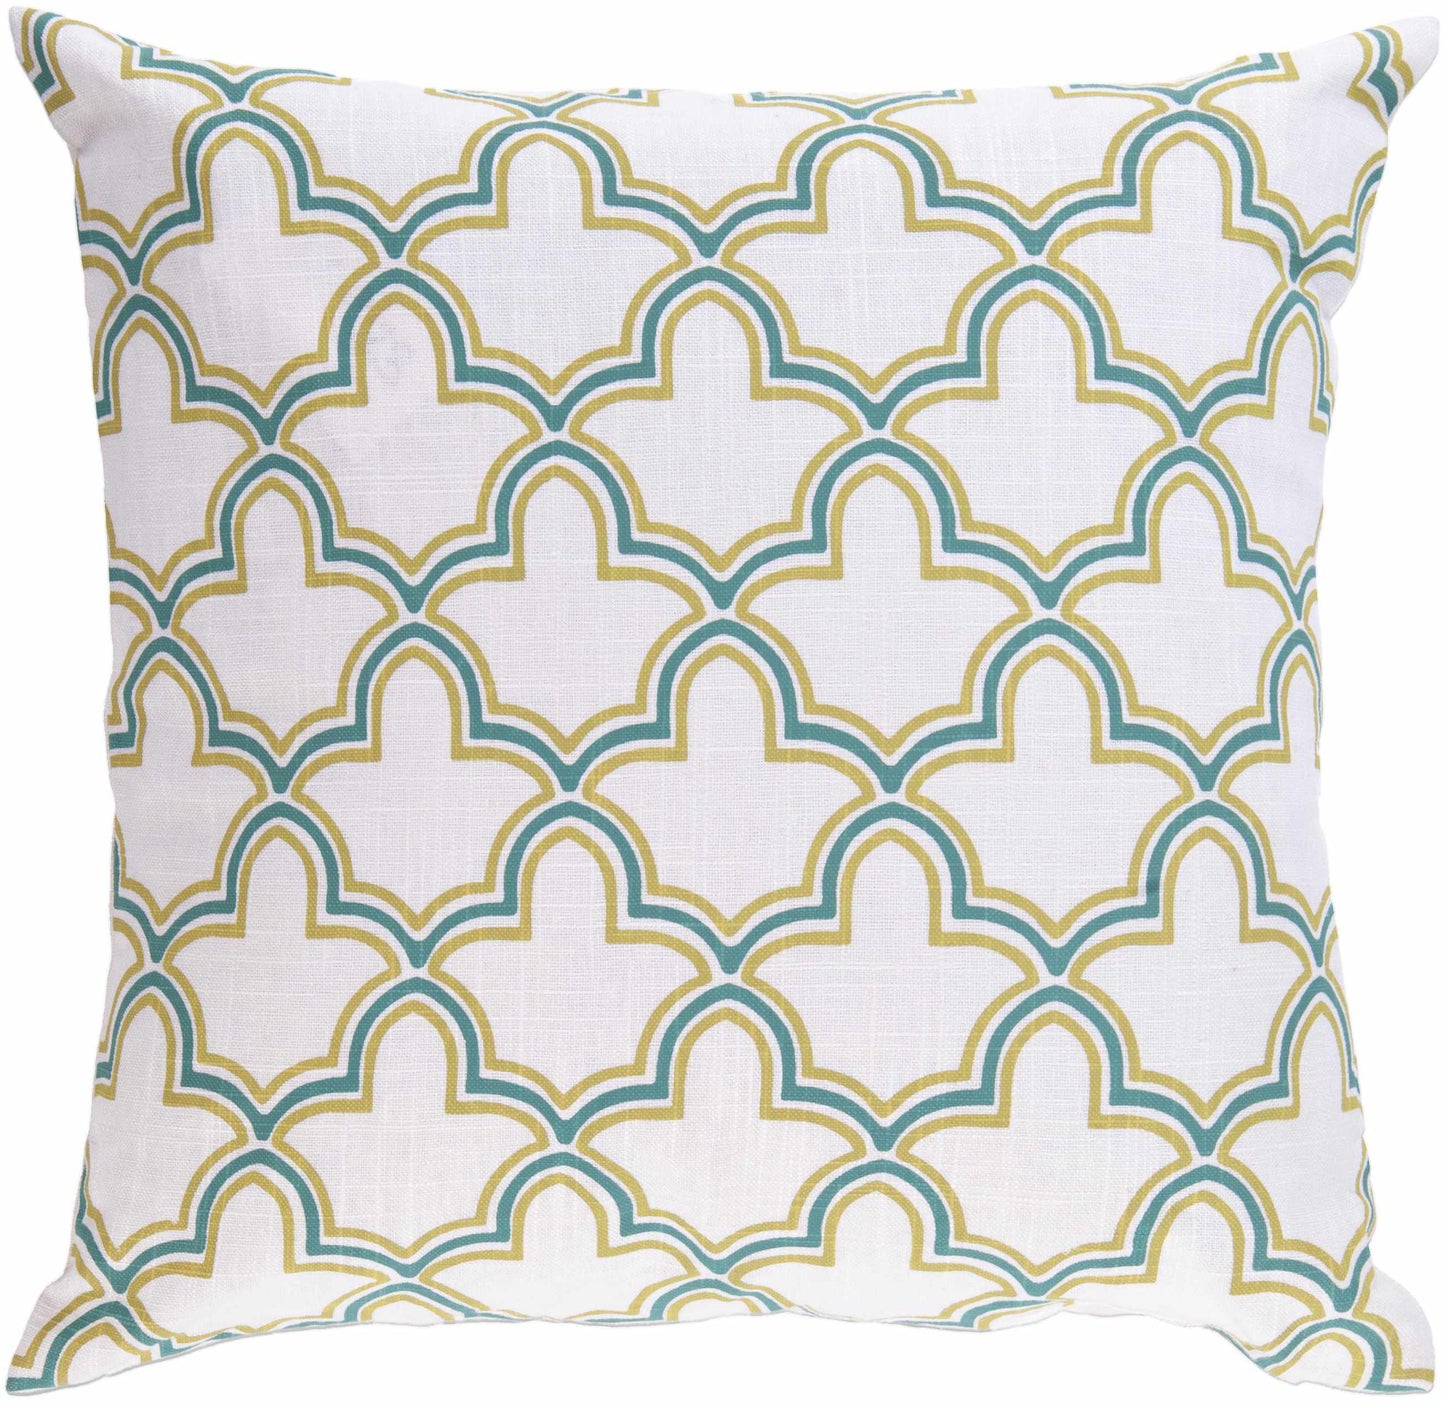 Couvin Emerald Pillow Cover